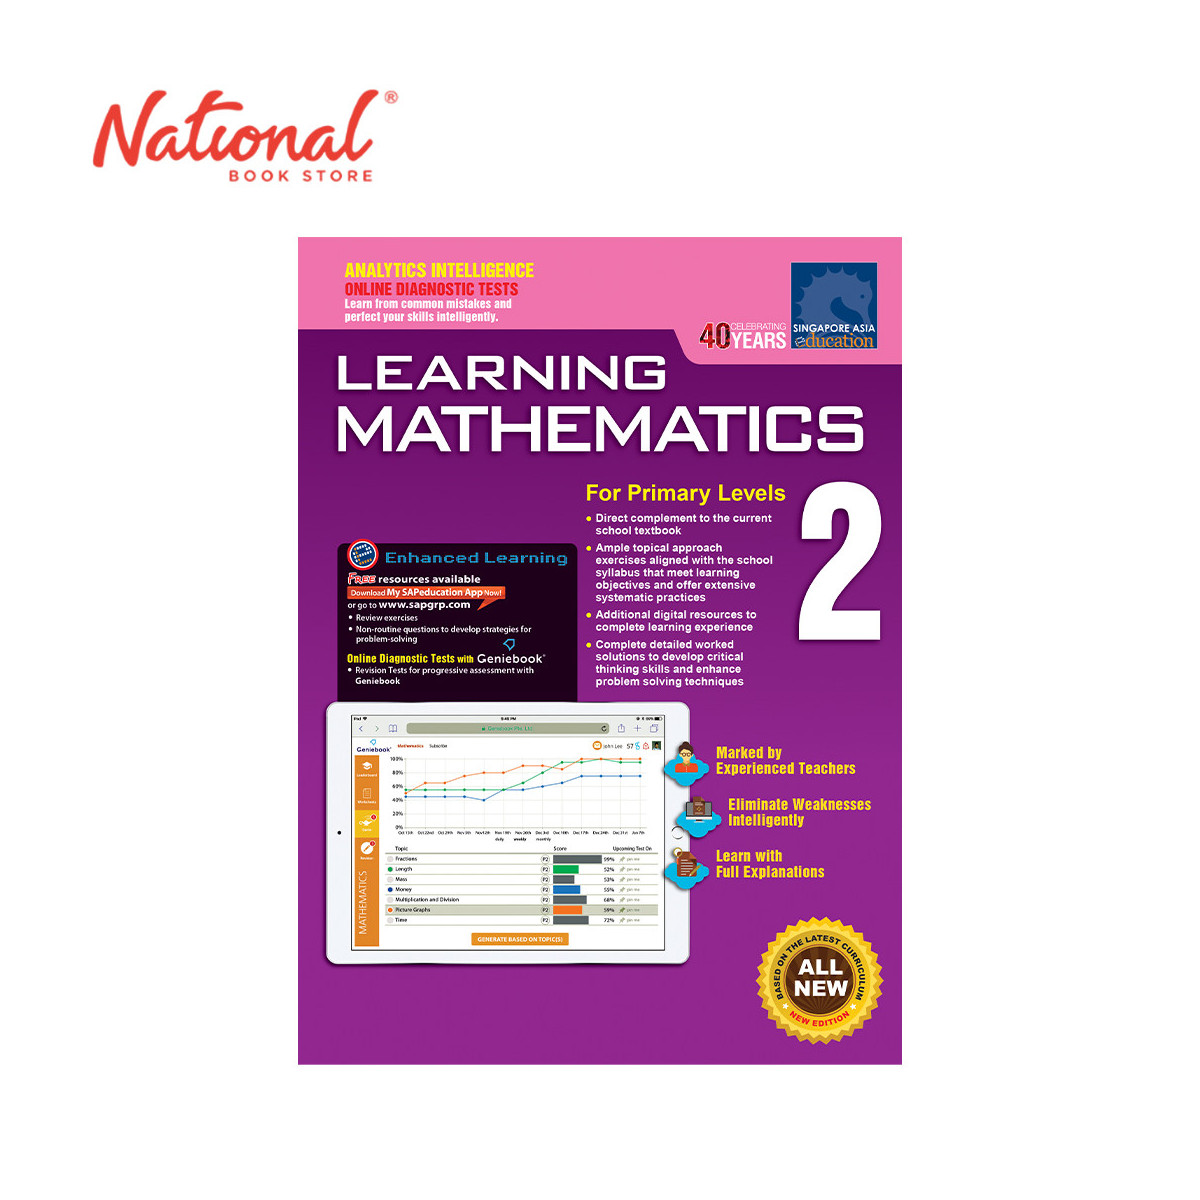 Learning Mathematics for Primary Levels 2 by Alan Tan and Tina Myung - Trade Paperback - Elementary